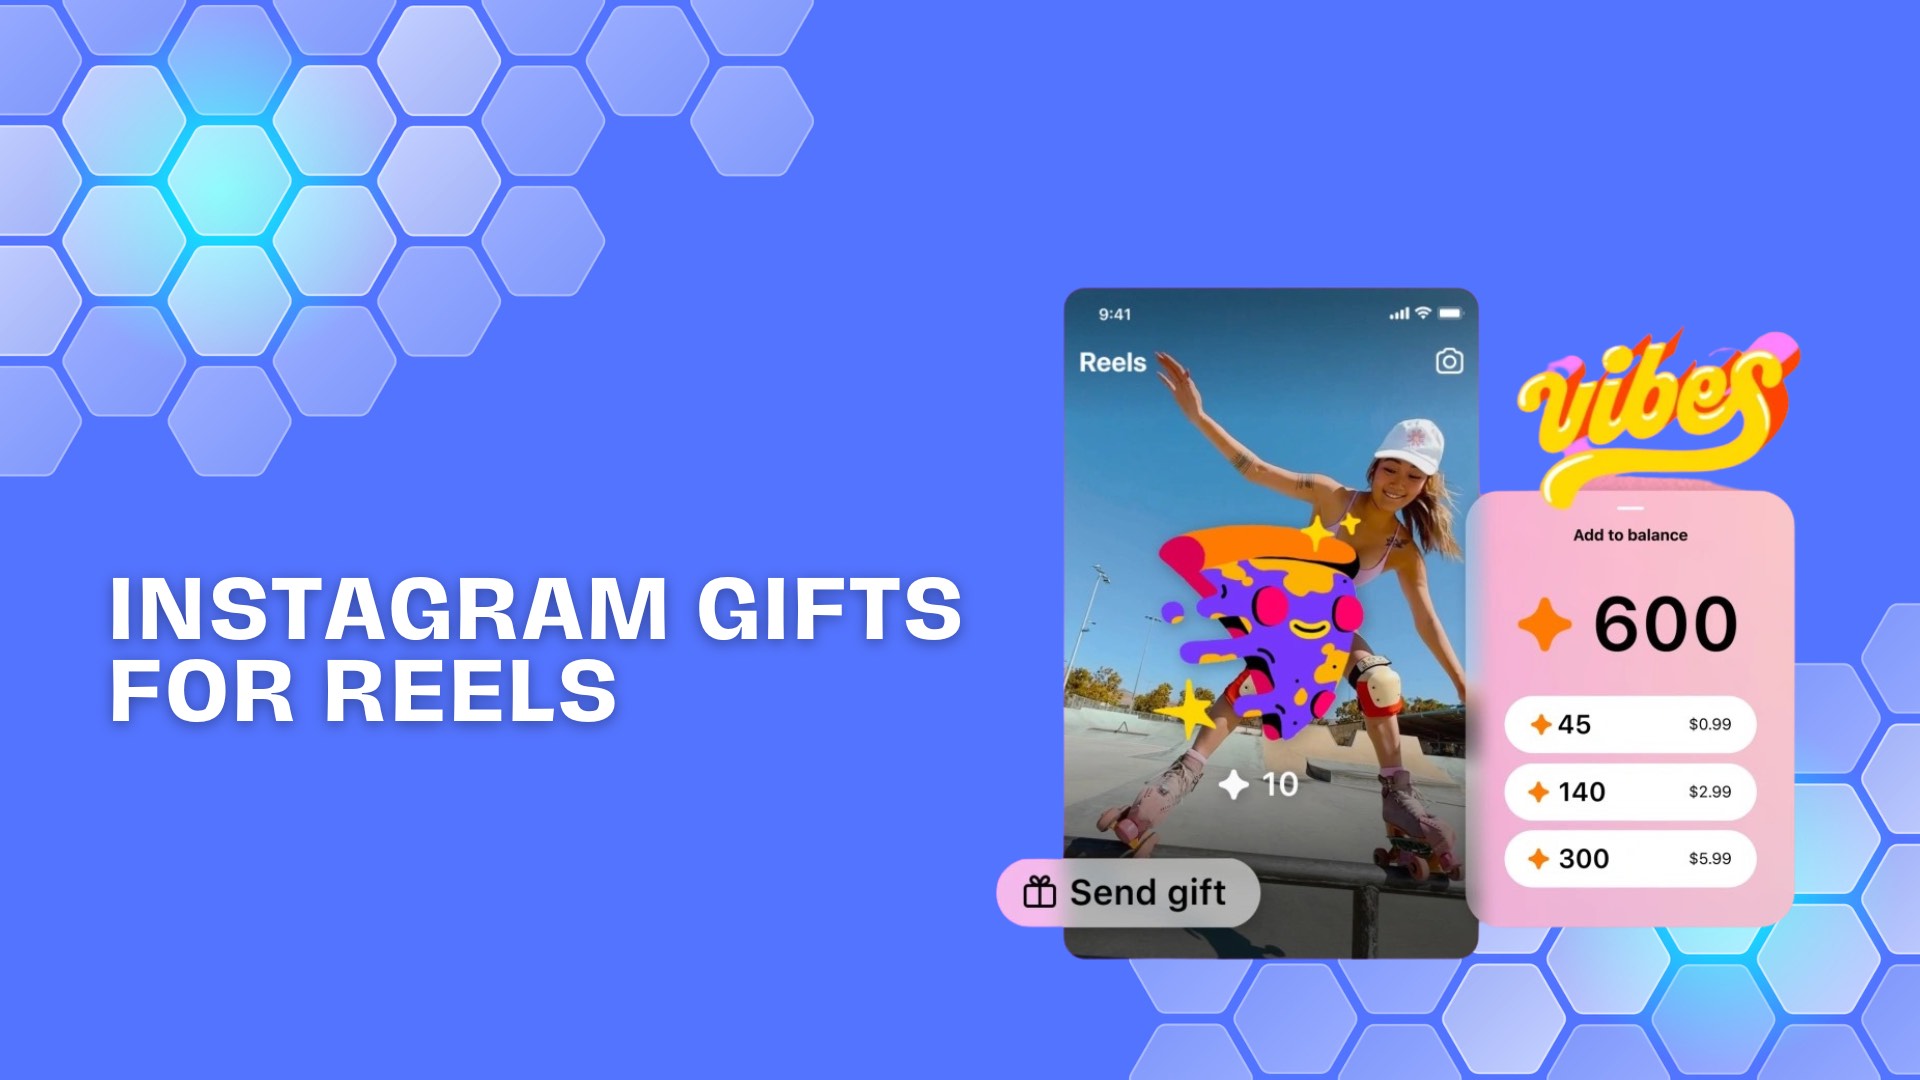 IG Gifts for Reels How Creators Can Earn More with Instagram Gifts